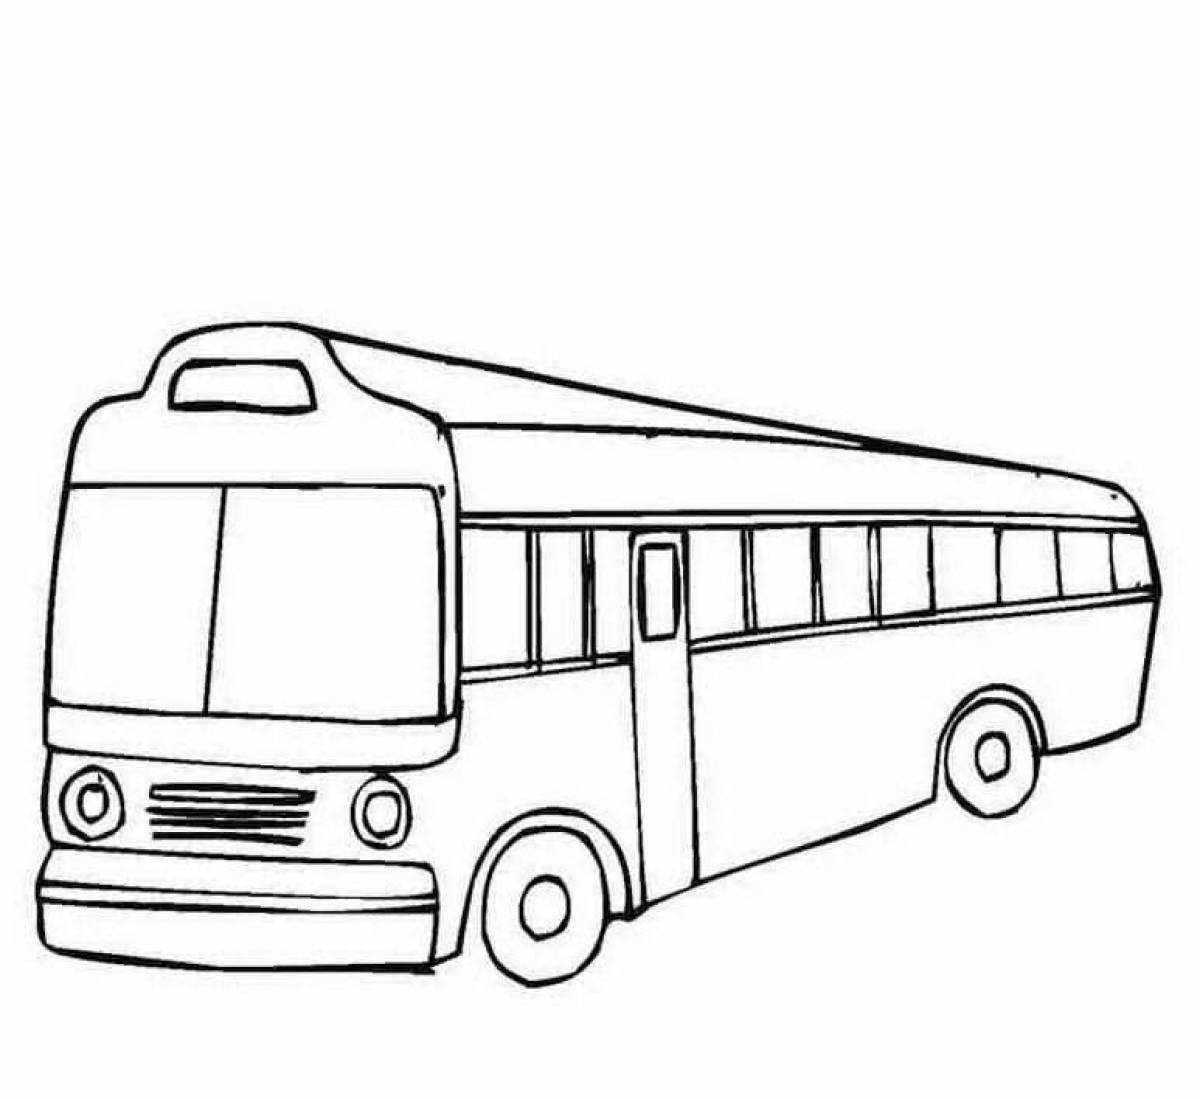 Coloring page cute electric bus